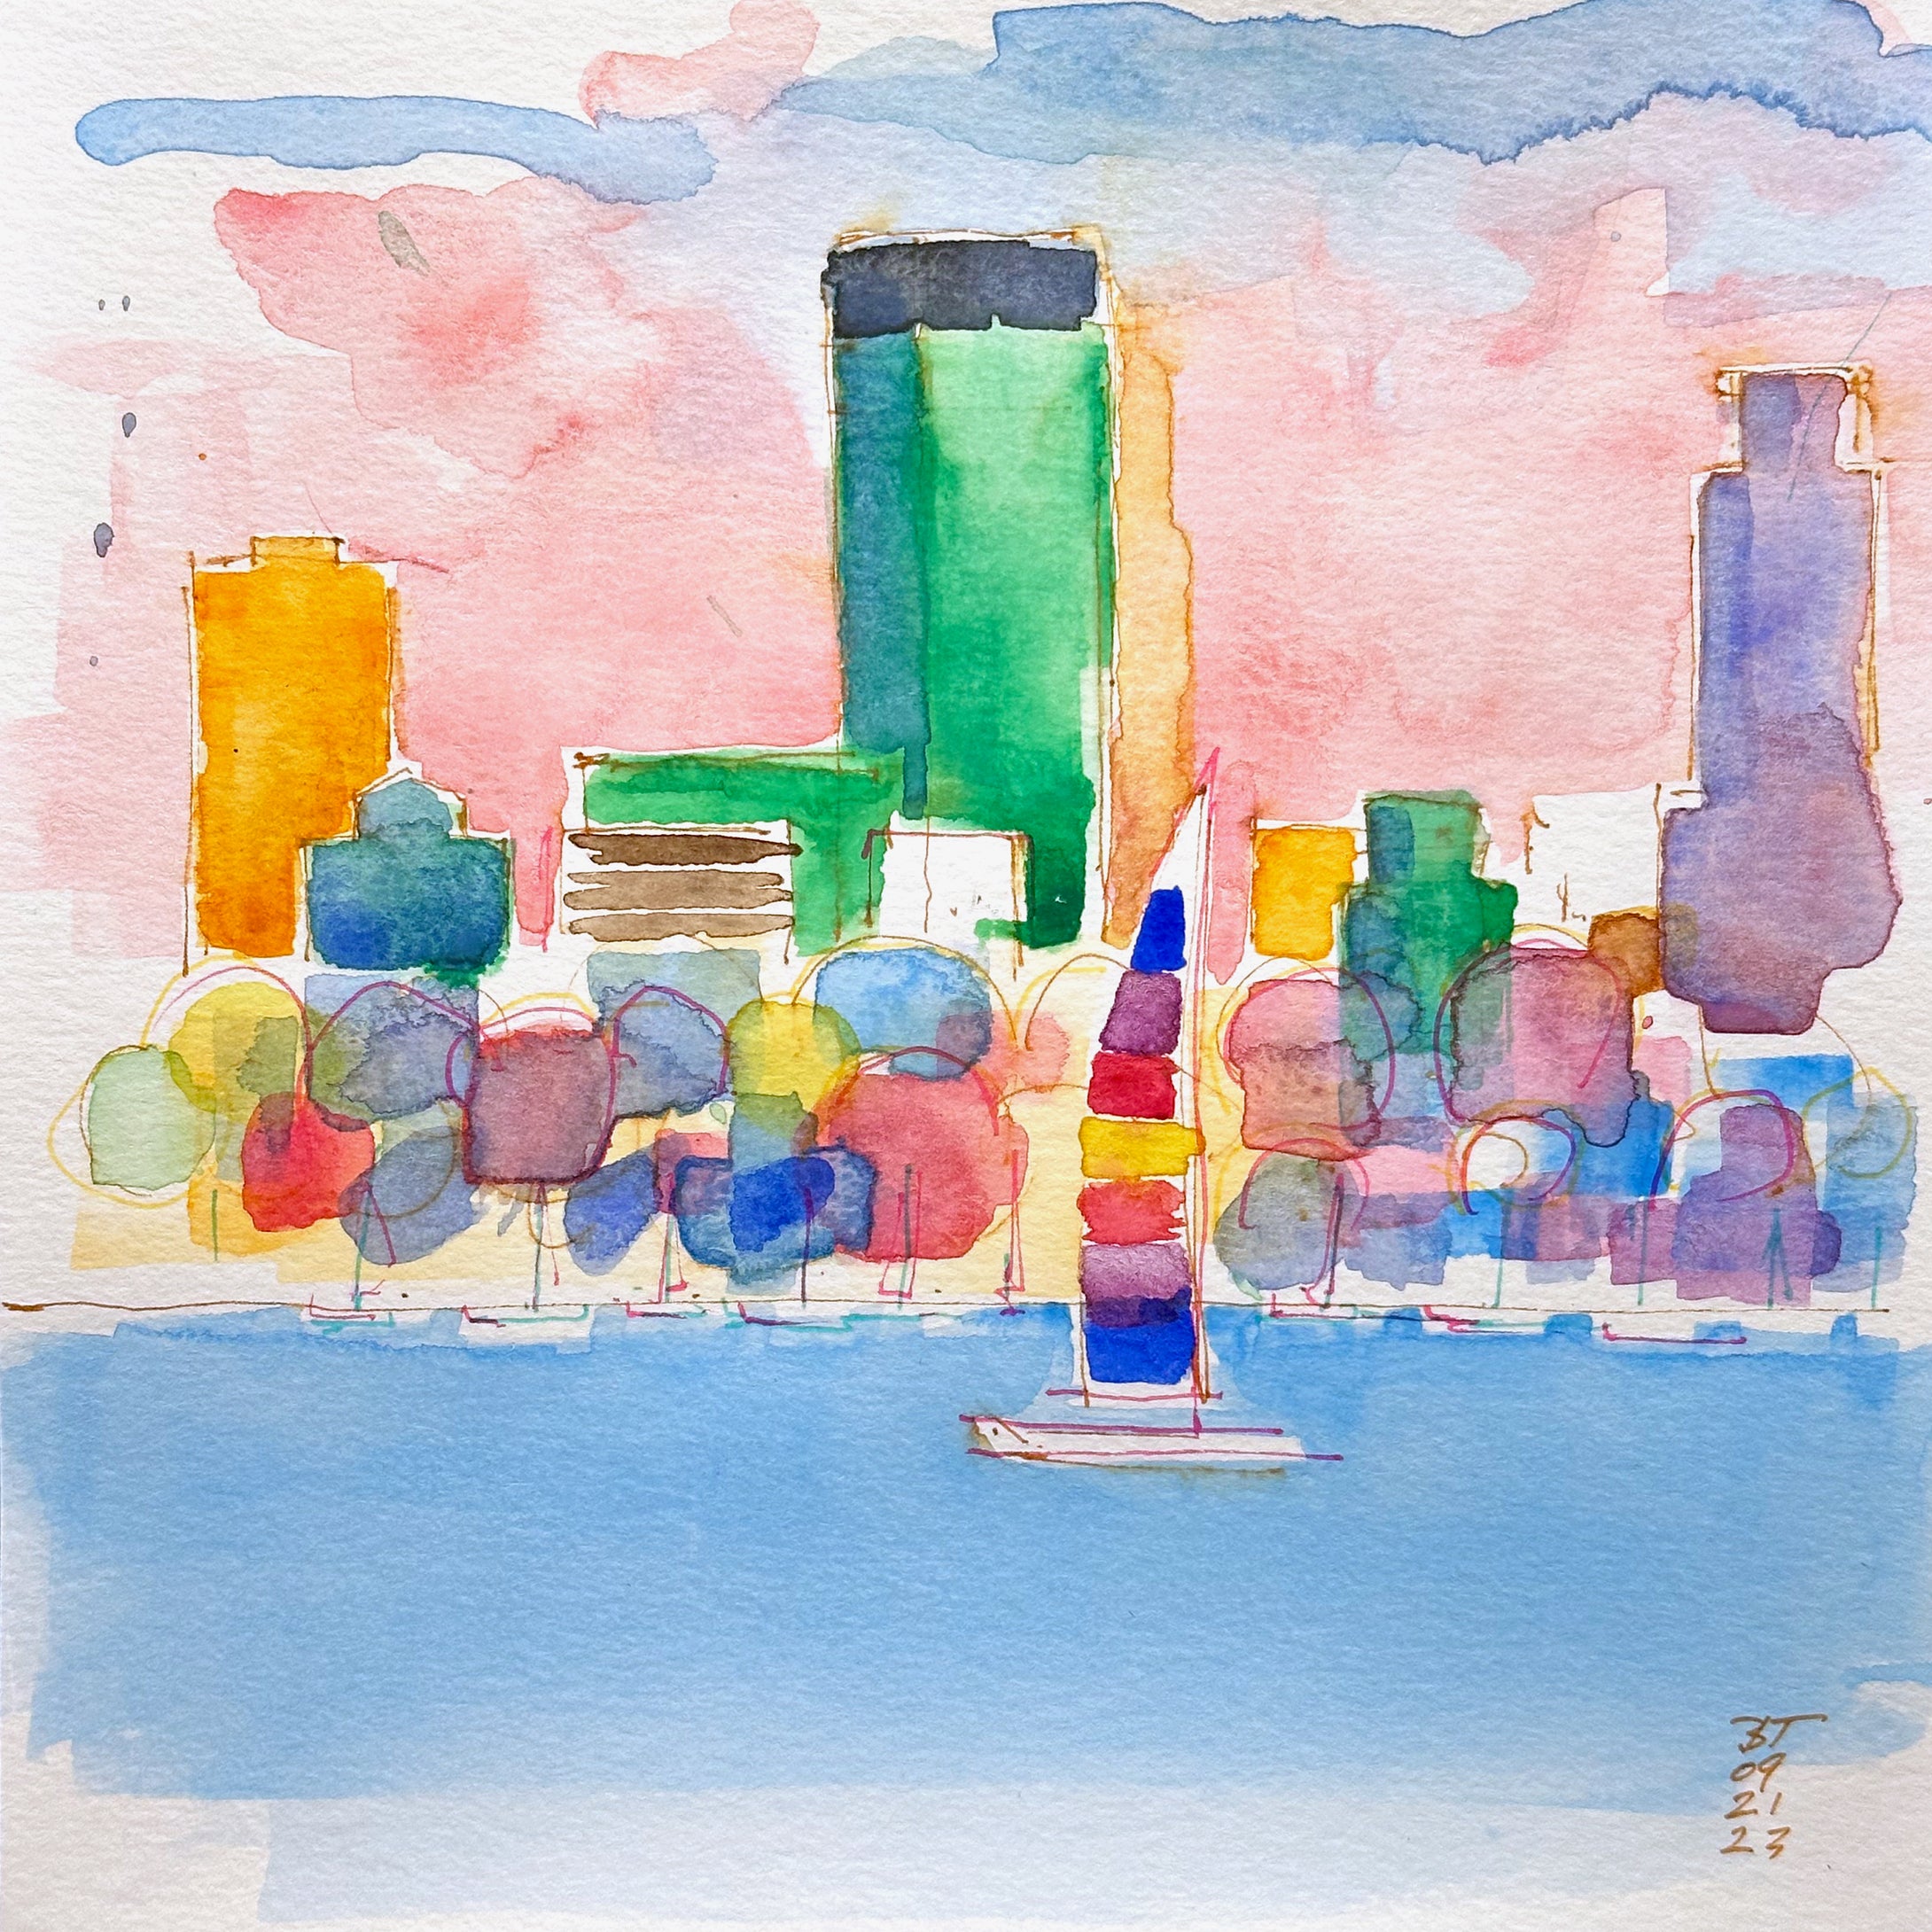 Mpls Skyline over Lake Calhoun with Colorful Sail Boat (8x8), 09.21.23